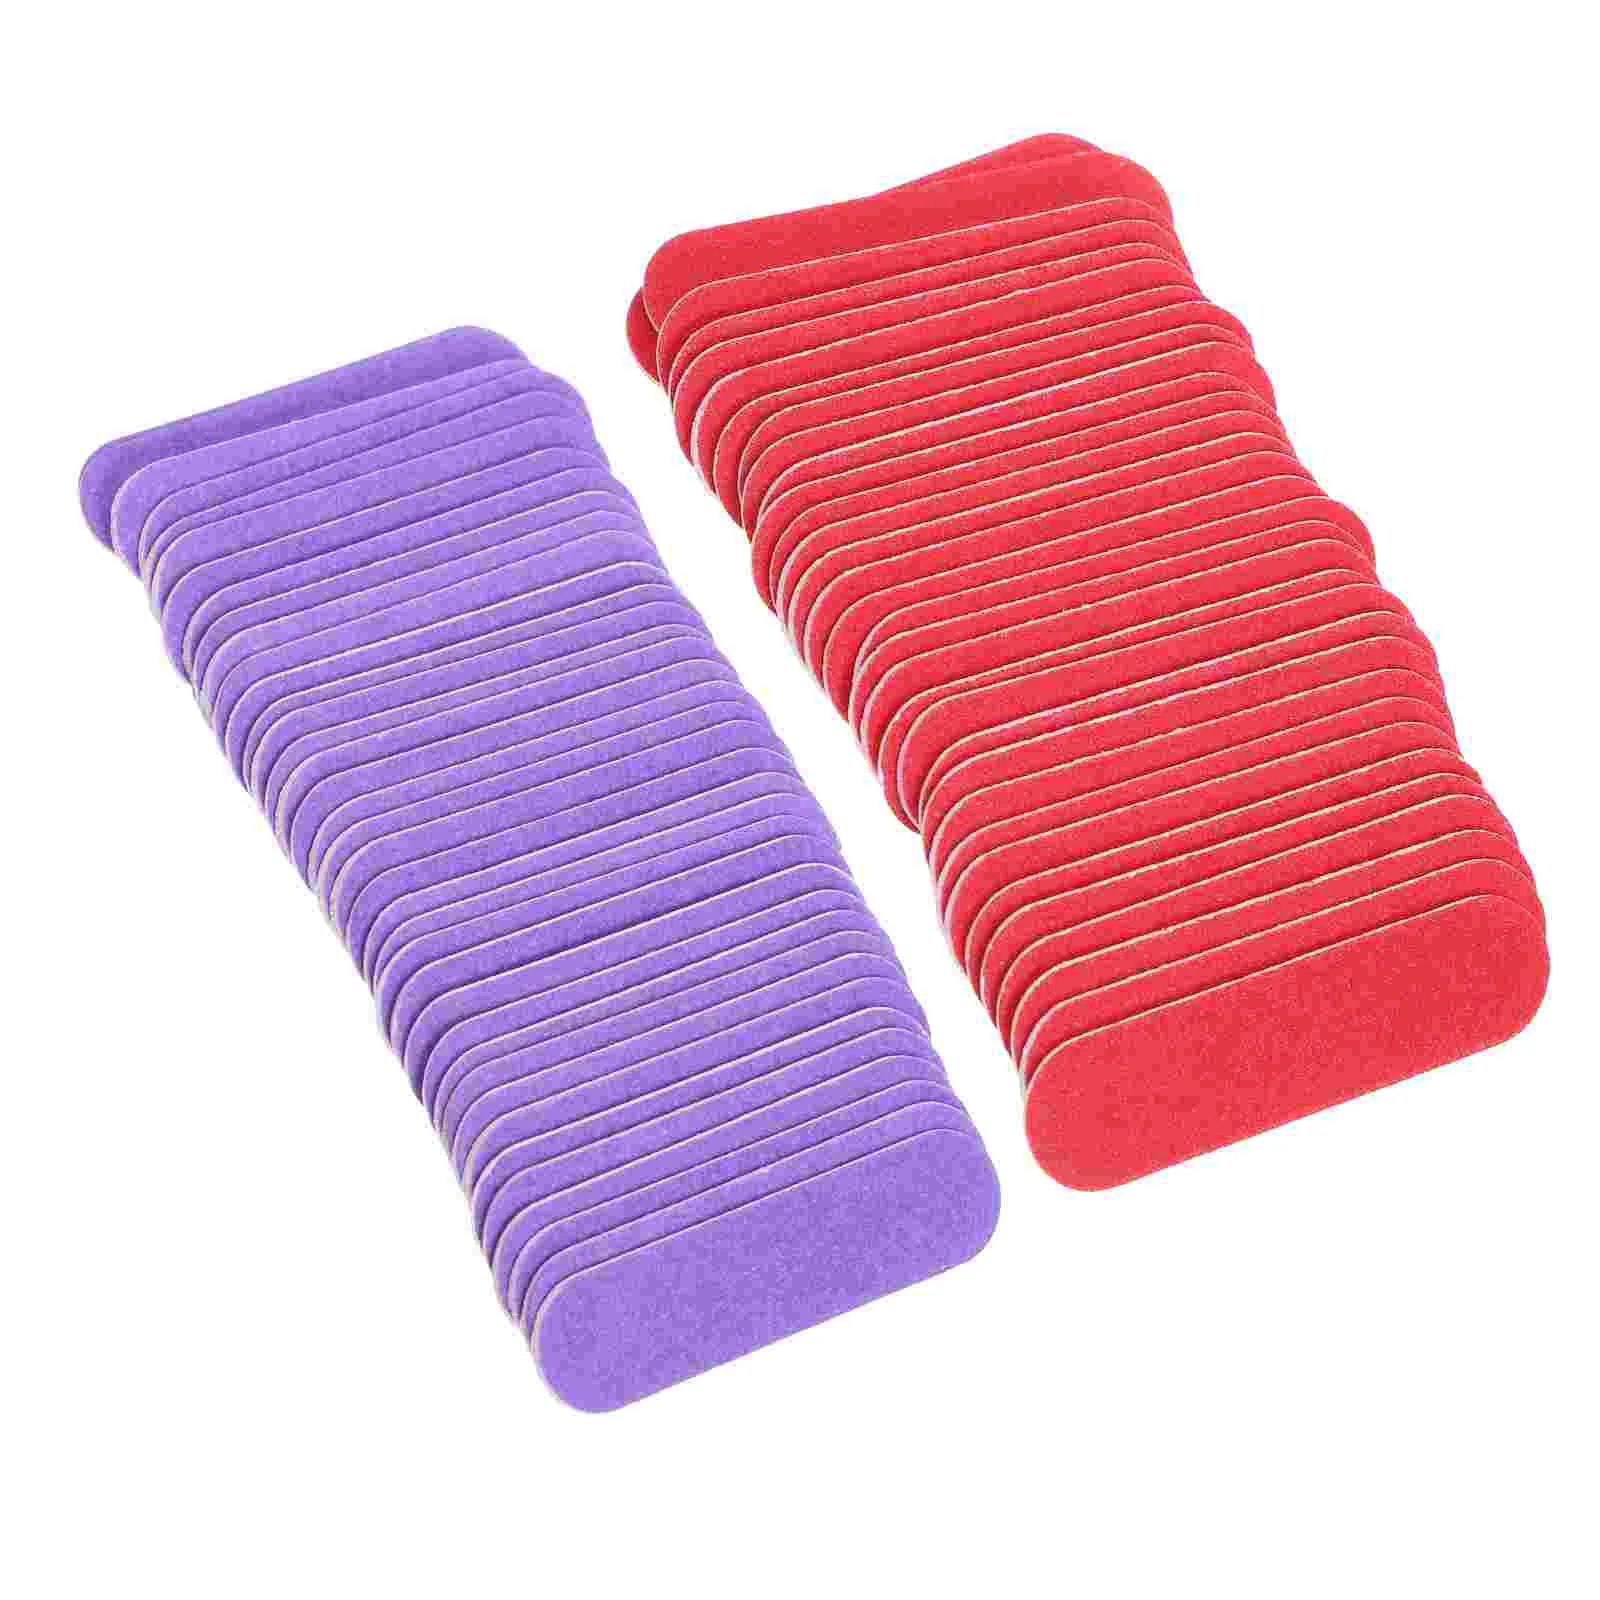 

Nail Files Emery Nails File Boards Colorful Professional Buffers Polish Grit Wooden 180 Board Set Buffer Natural